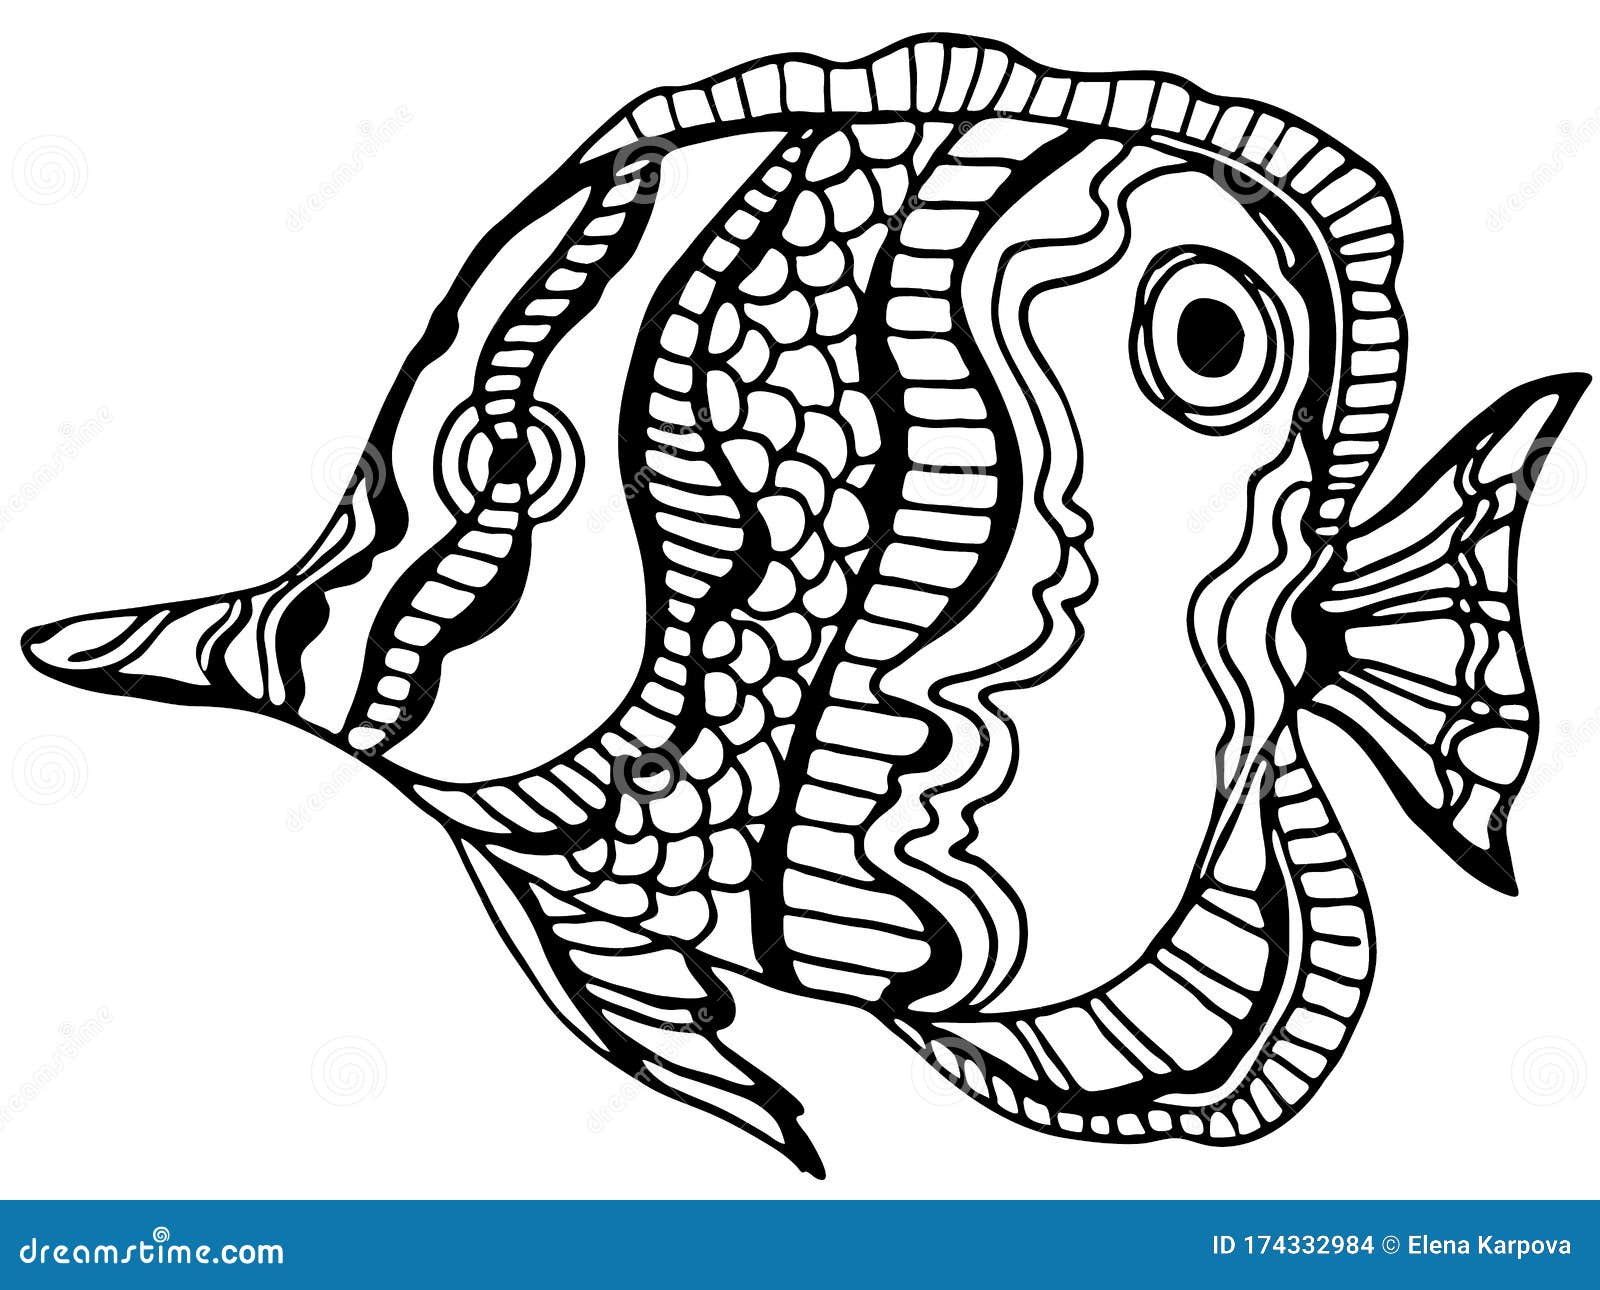 Tropical Fish Coloring Page. Anti-stress Coloring for Adult and